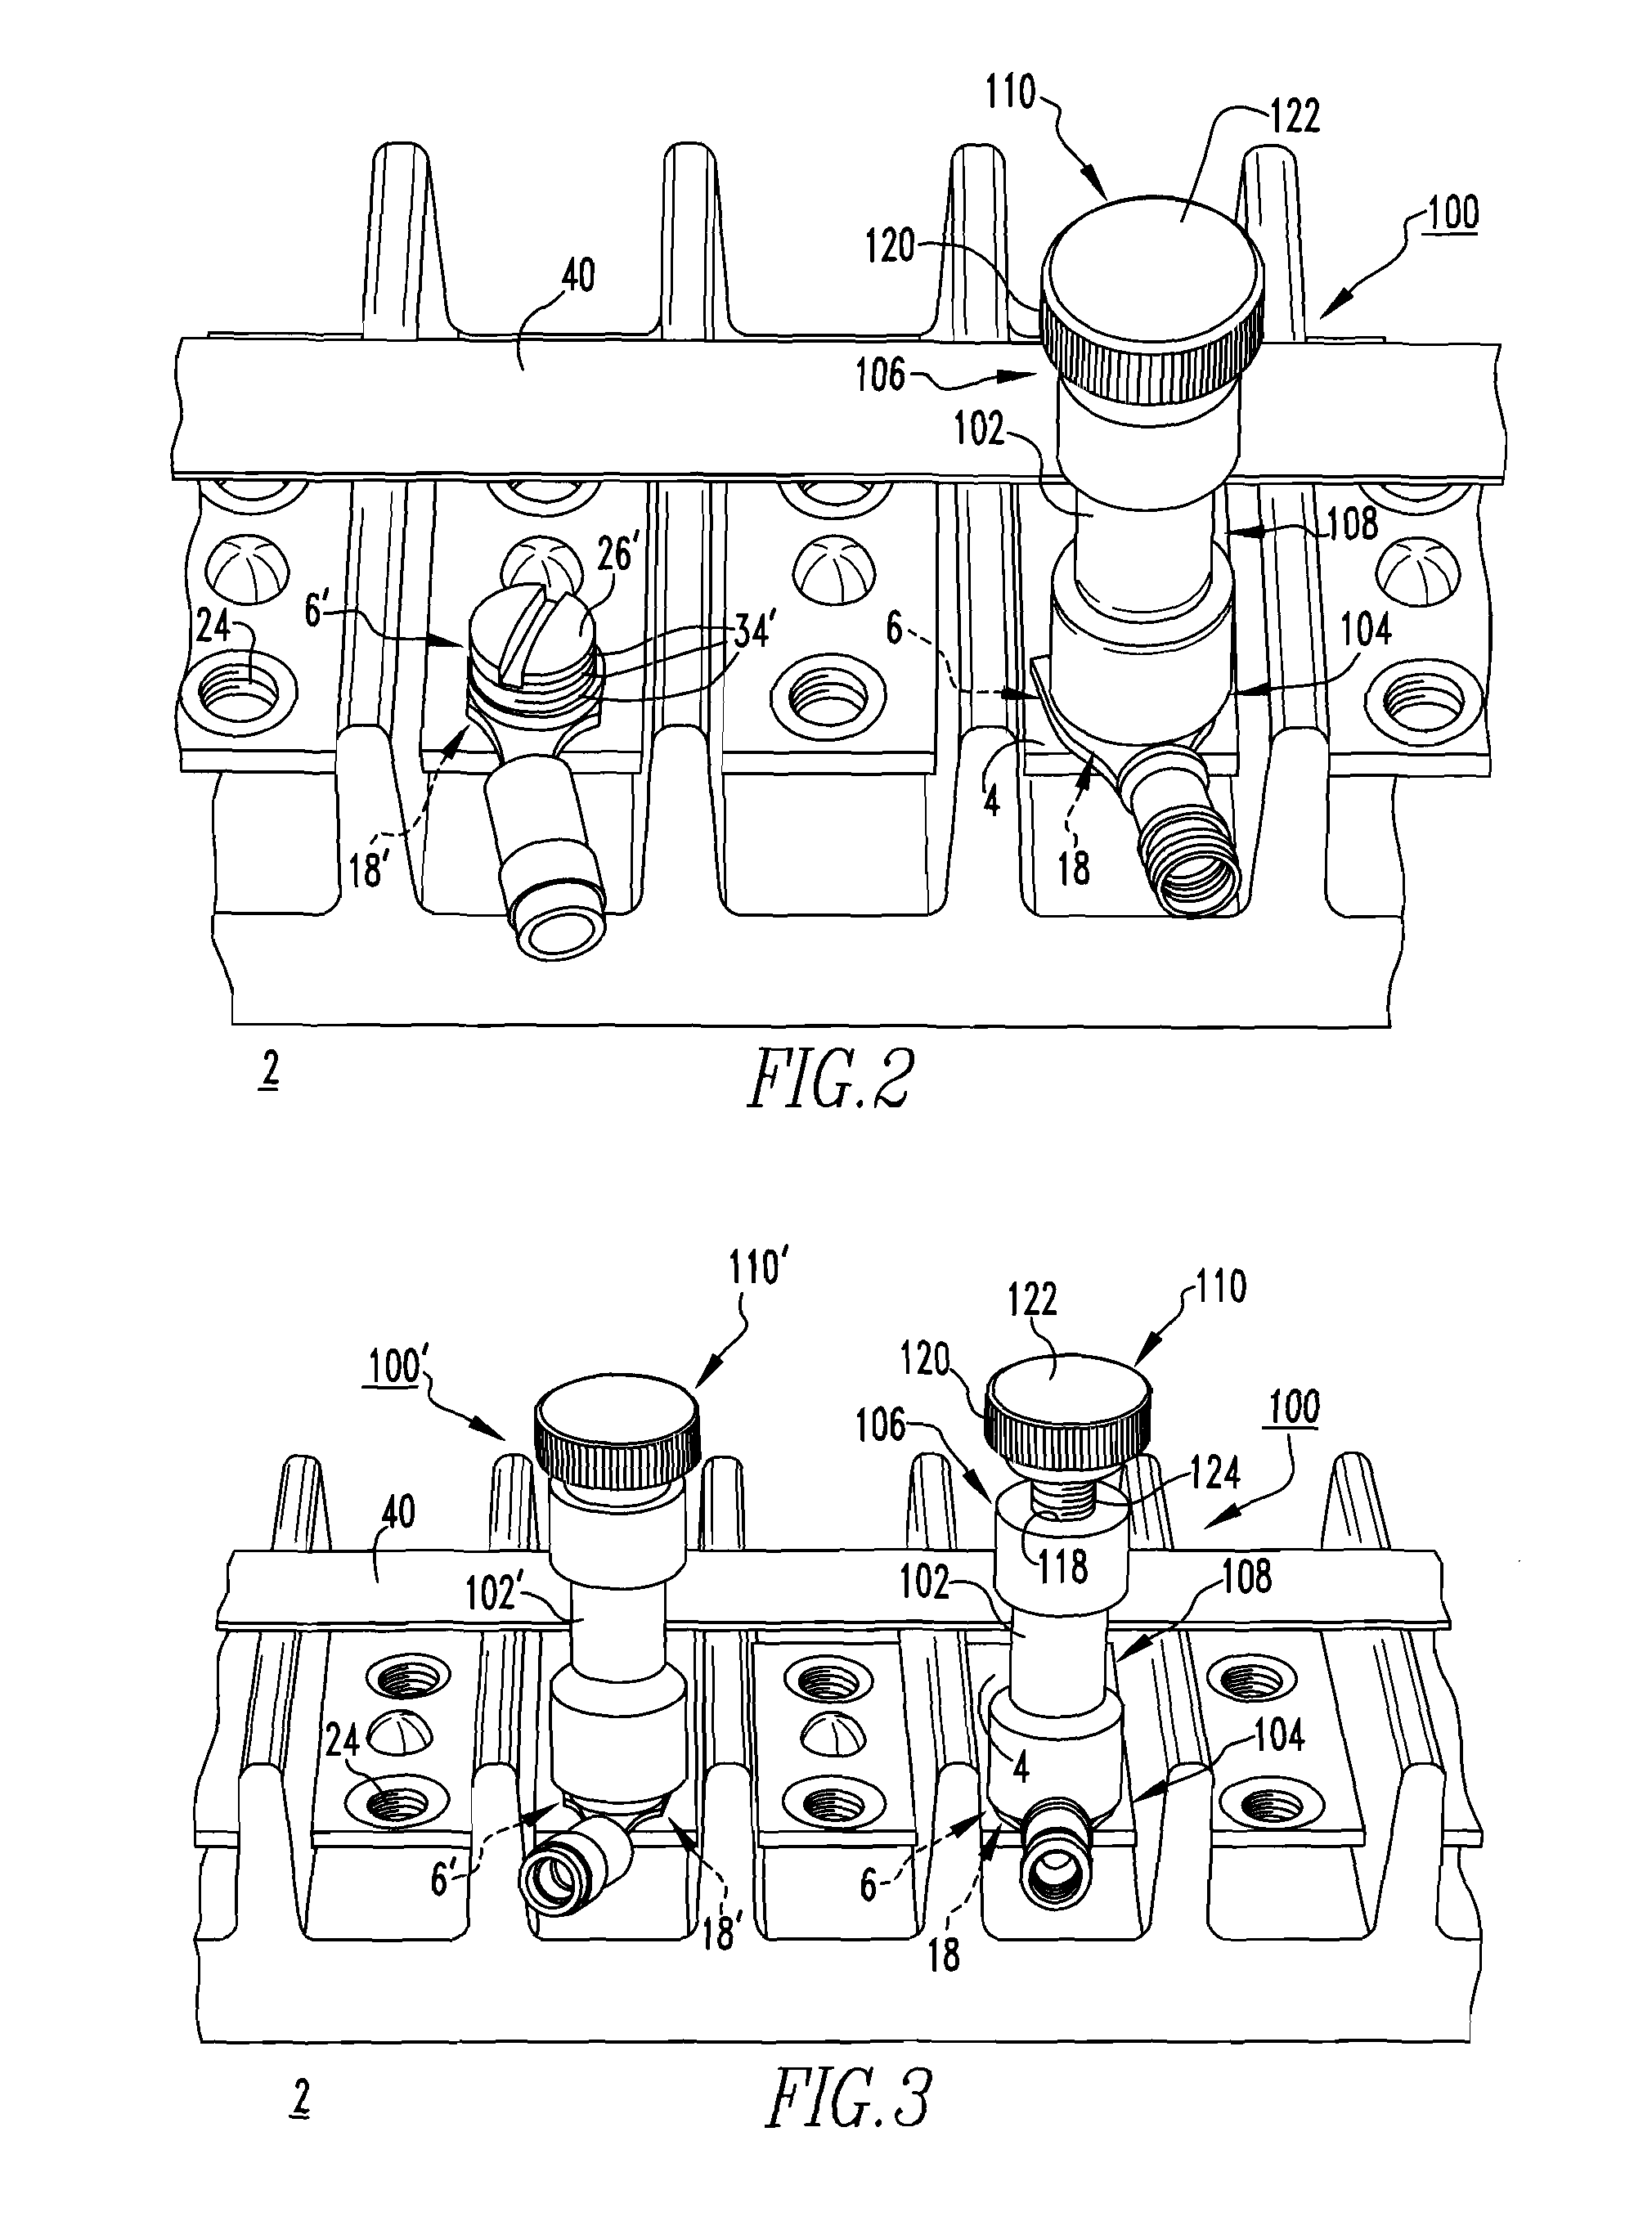 Electrical connector assembly, test lead assembly therefor, and associated method